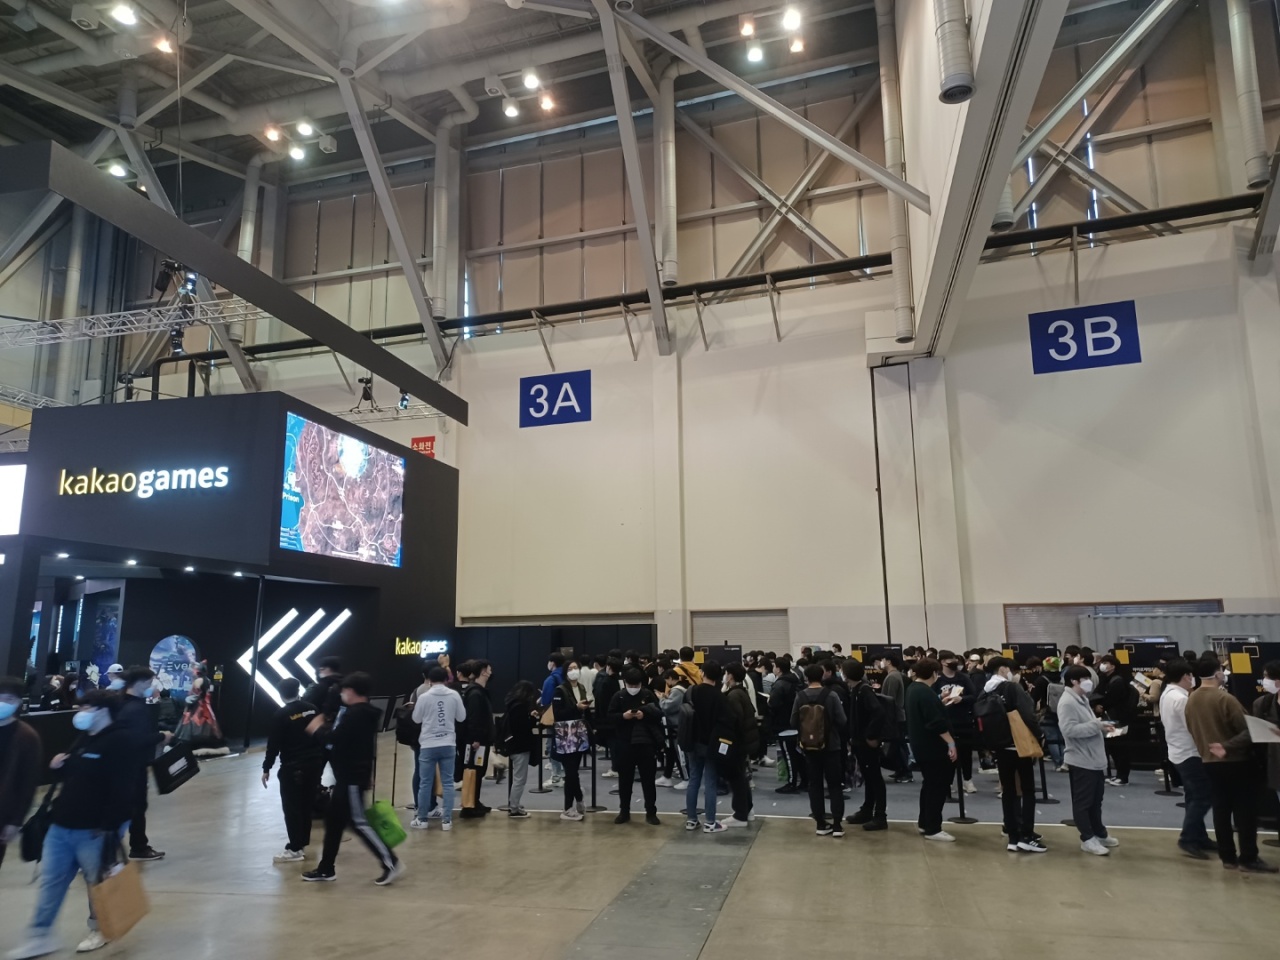 People wait in line at the waiting zone next to Kakao Games’ booth. (Lee Si-jin/The Korea Herald)